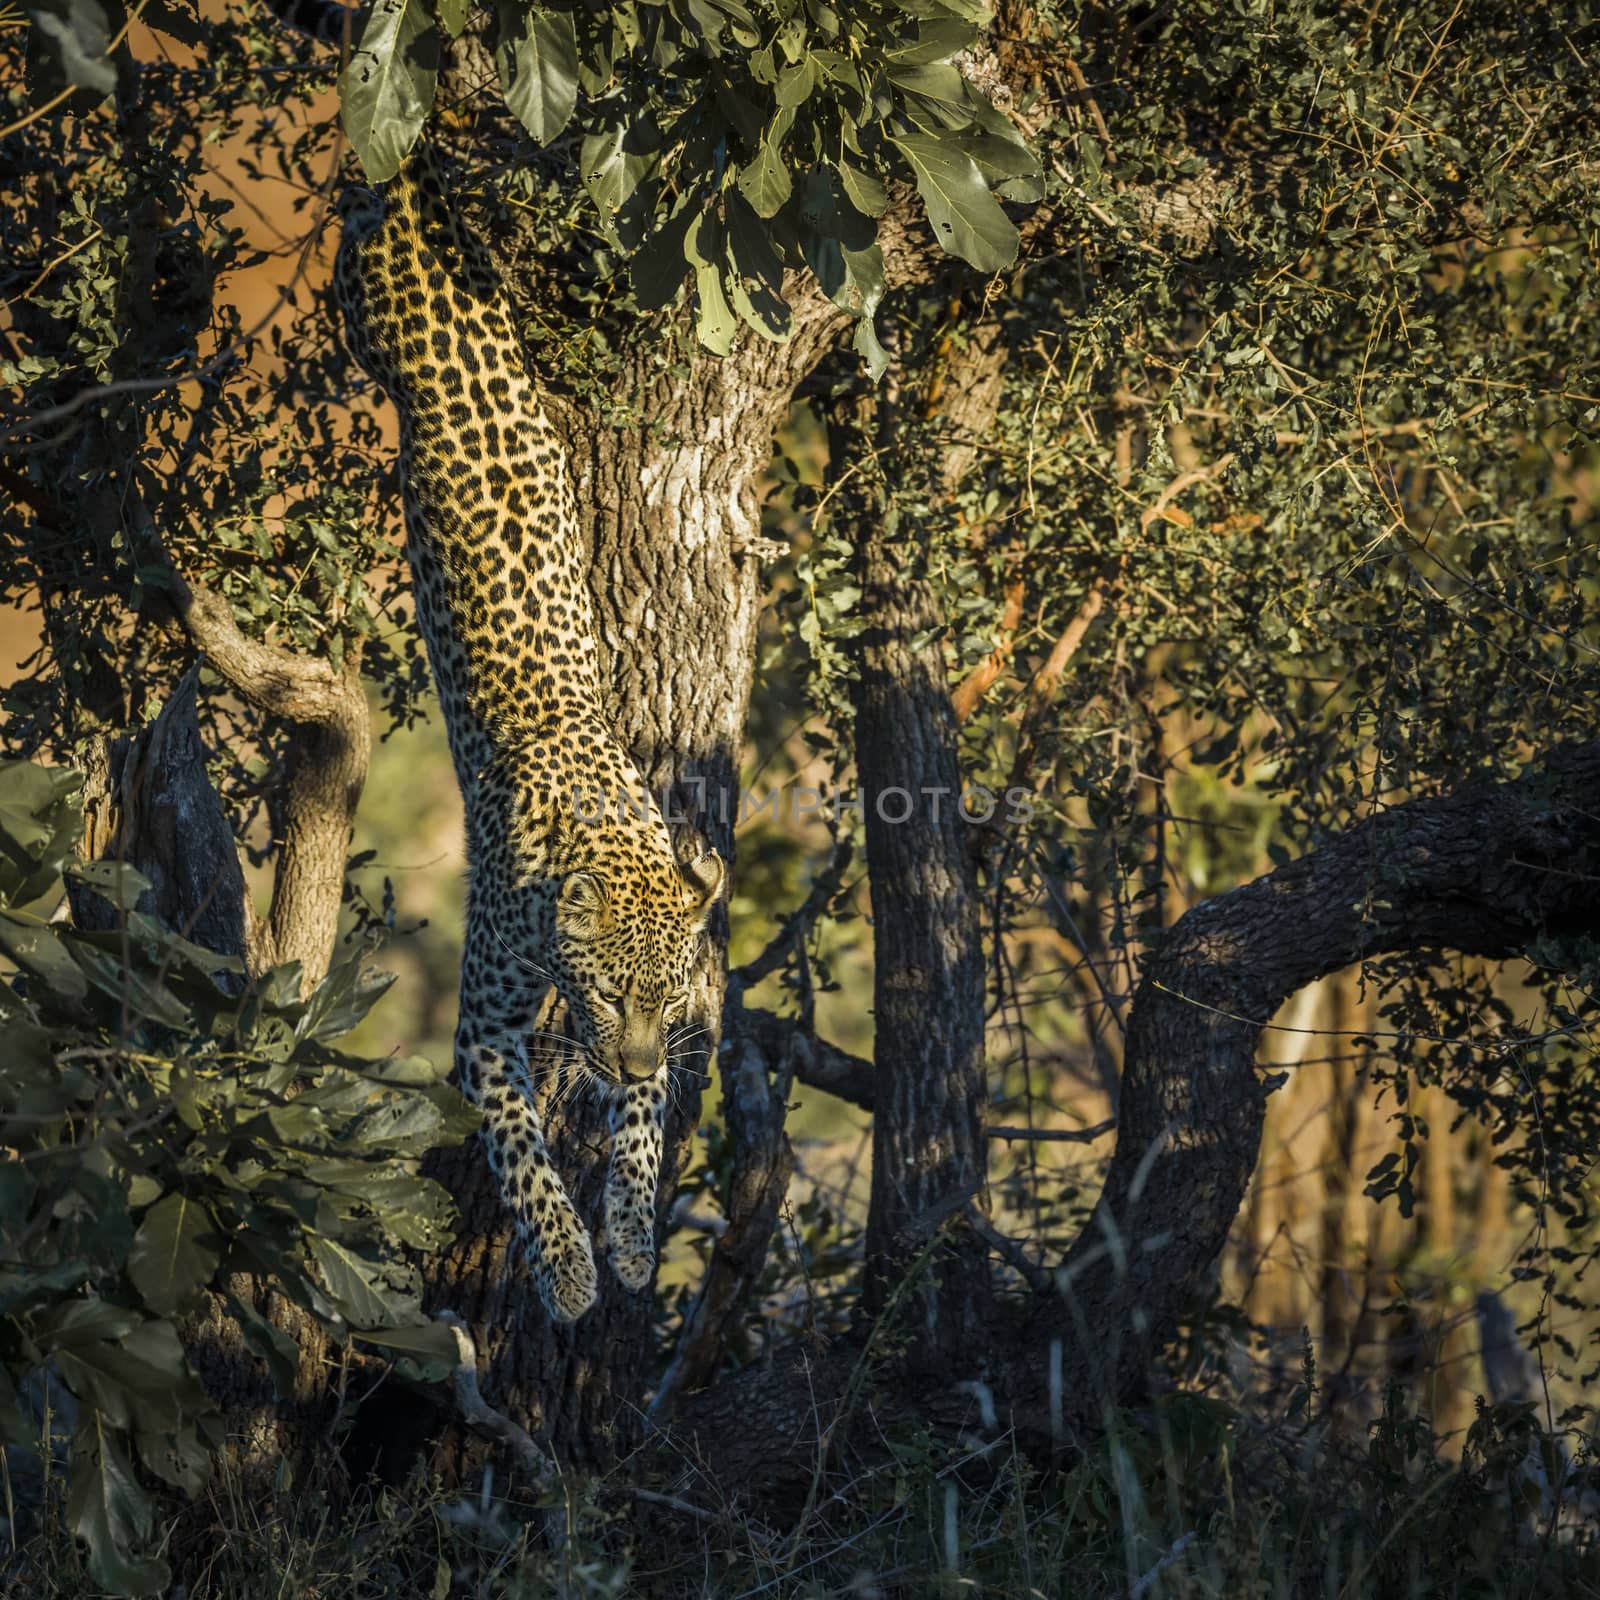 Leopard in Kruger National park, South Africa by PACOCOMO